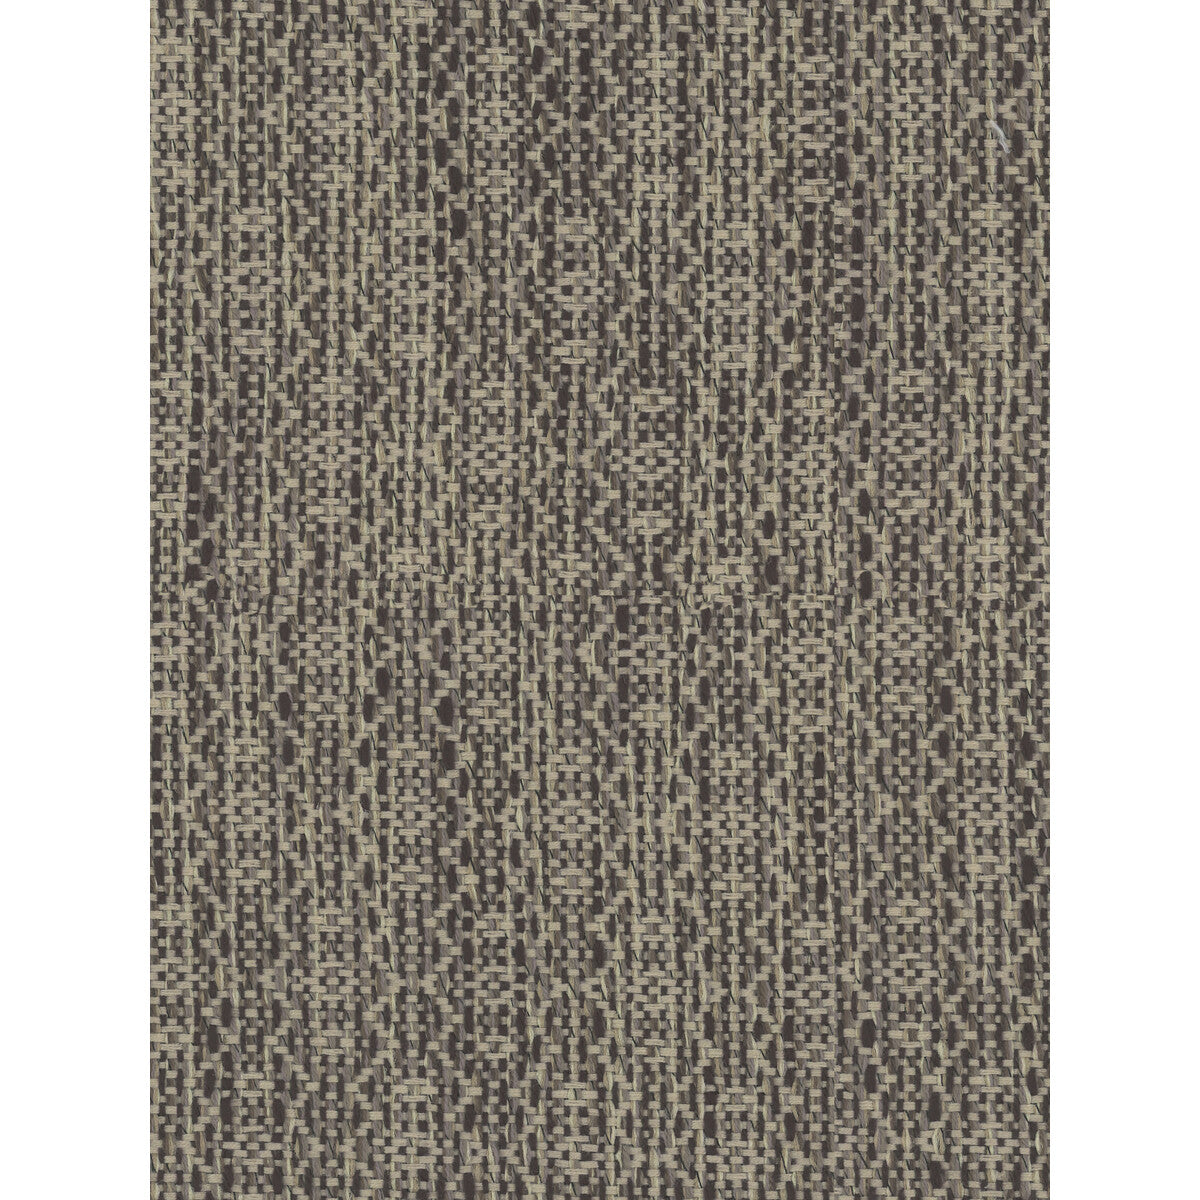 Kravet Contract fabric in 34630-811 color - pattern 34630.811.0 - by Kravet Contract in the Crypton Incase collection